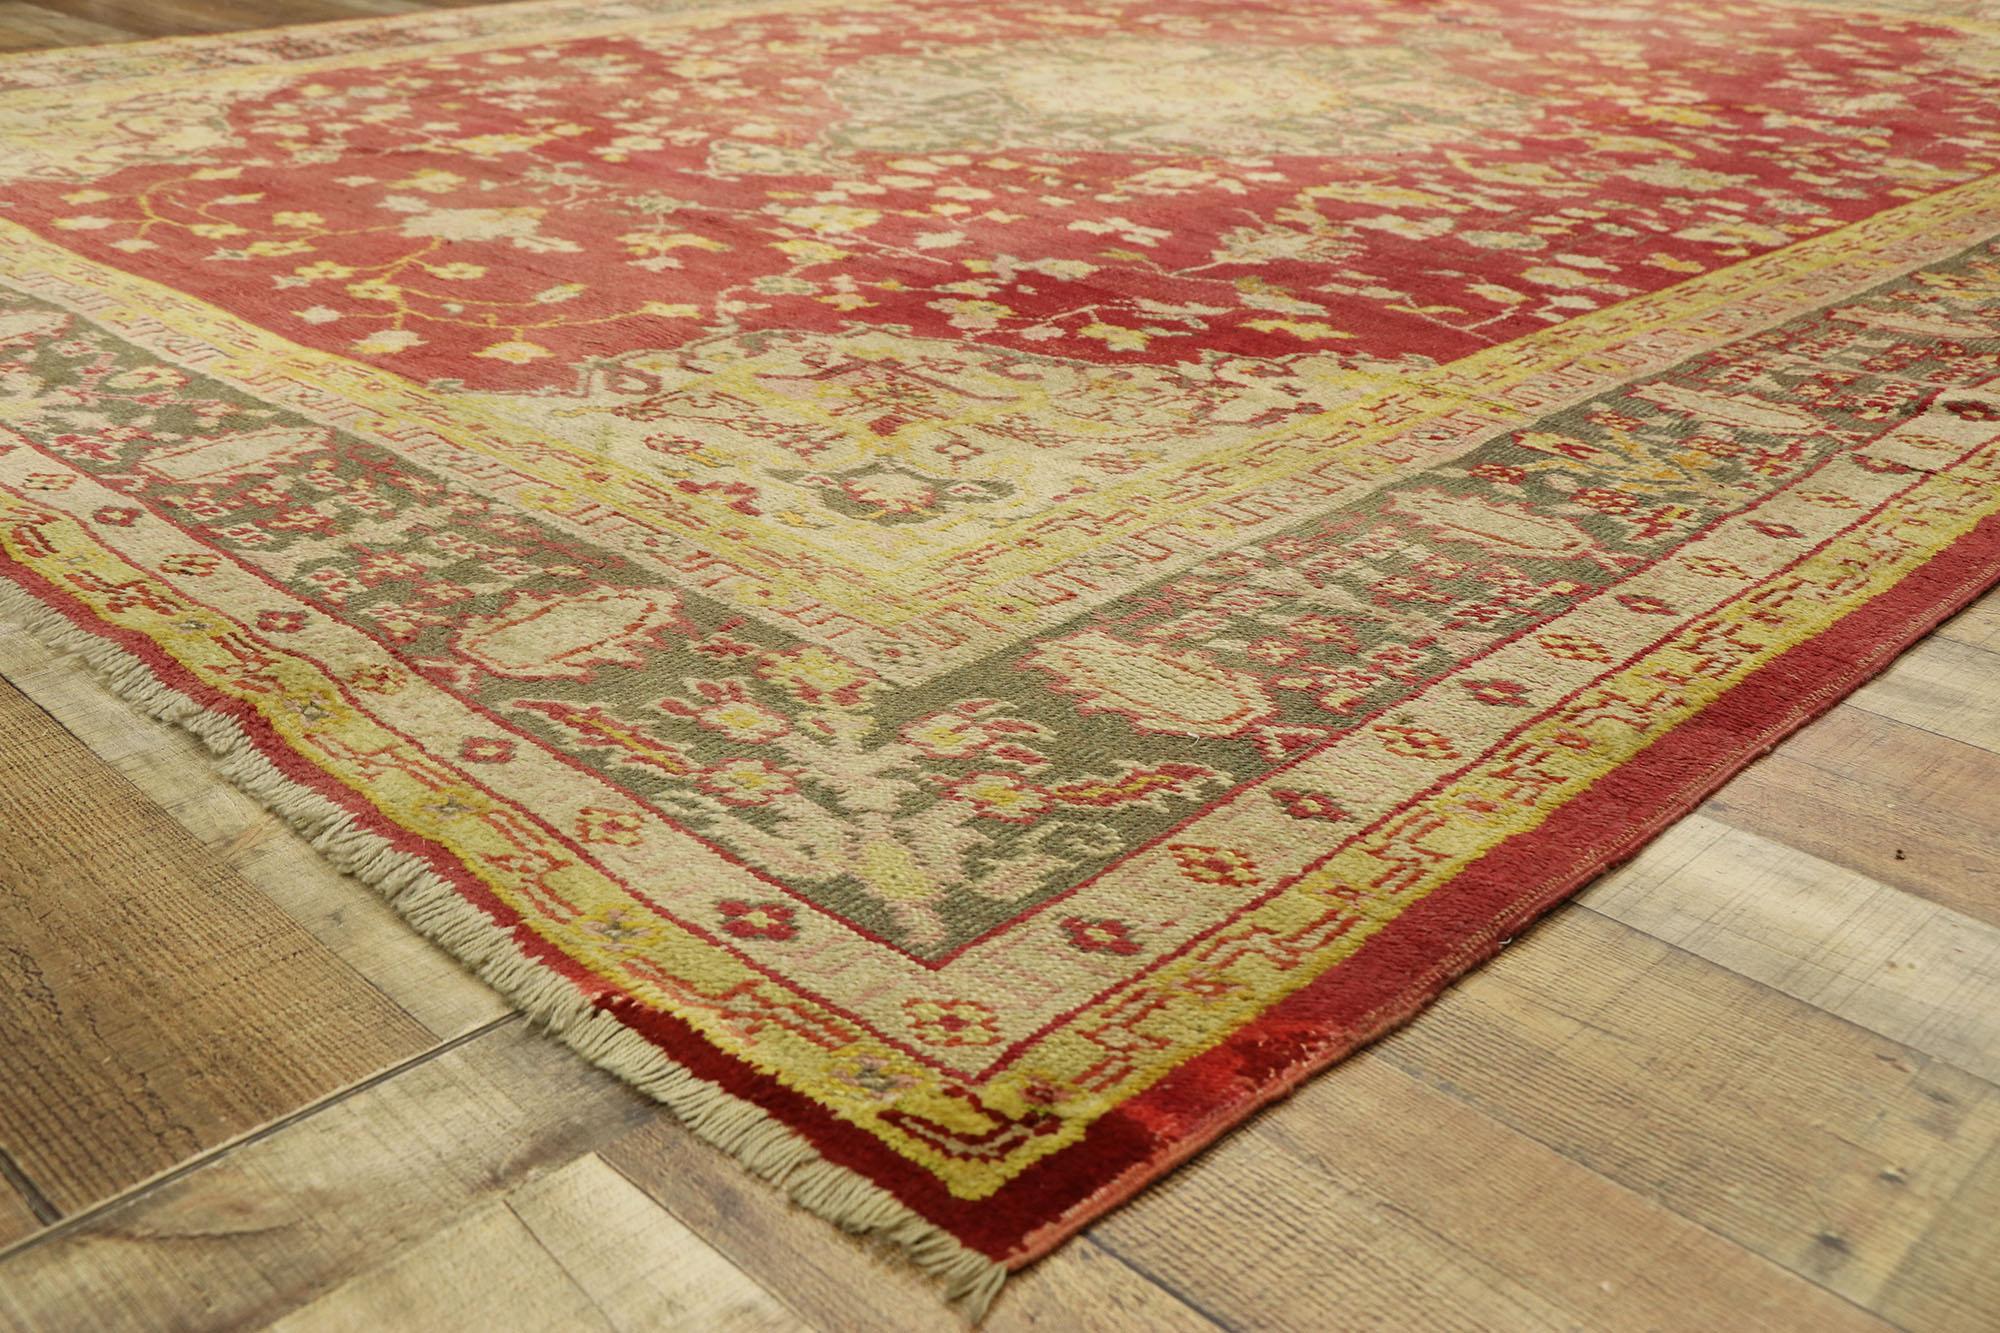 20th Century Distressed Antique Turkish Oushak Rug, 9'07 x 12'01 For Sale